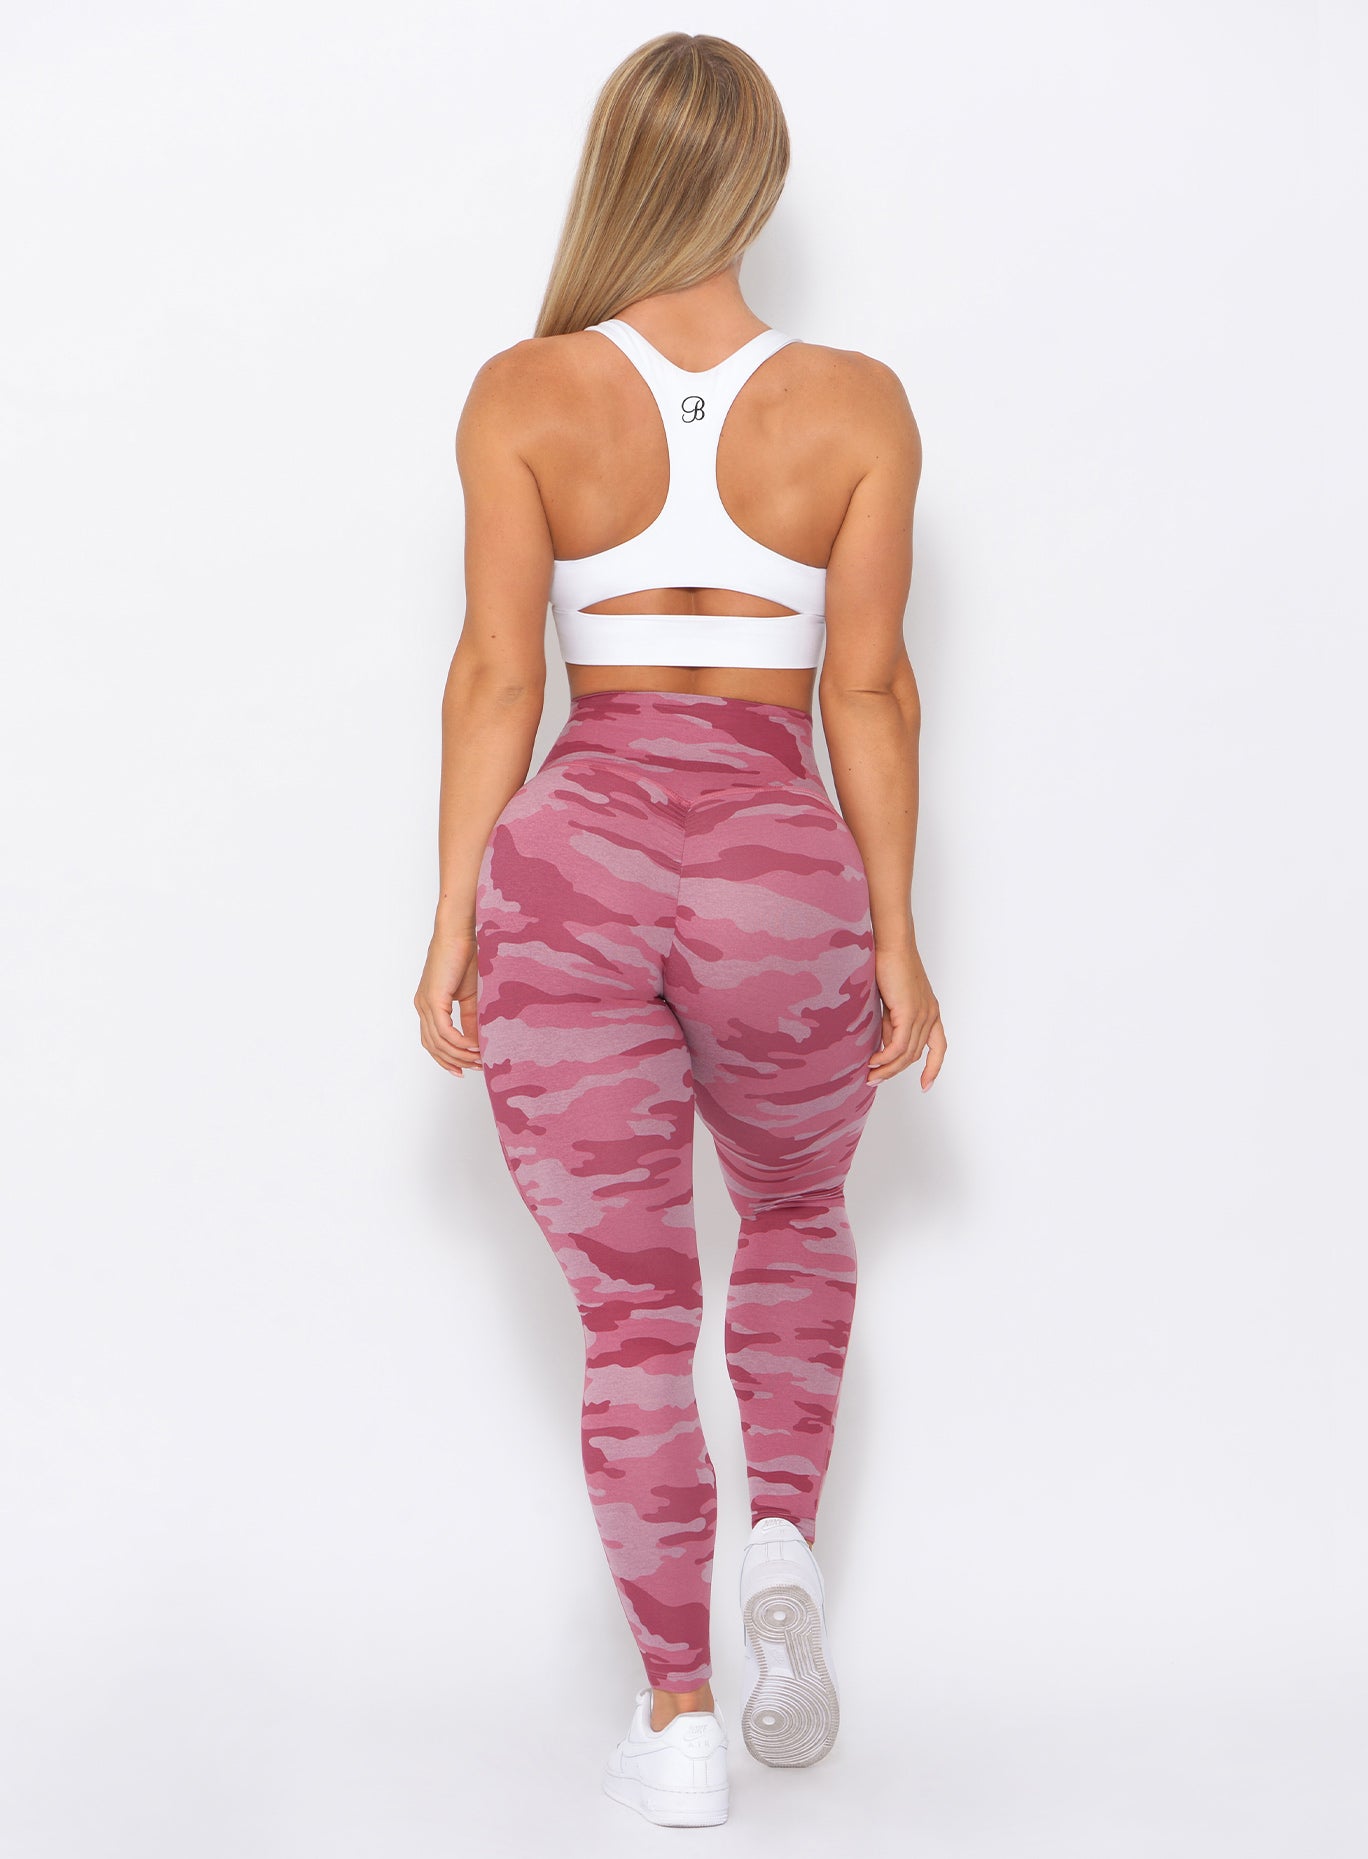 Back of the model wearing our fit camo leggings in hibiscus camo color and a white bra